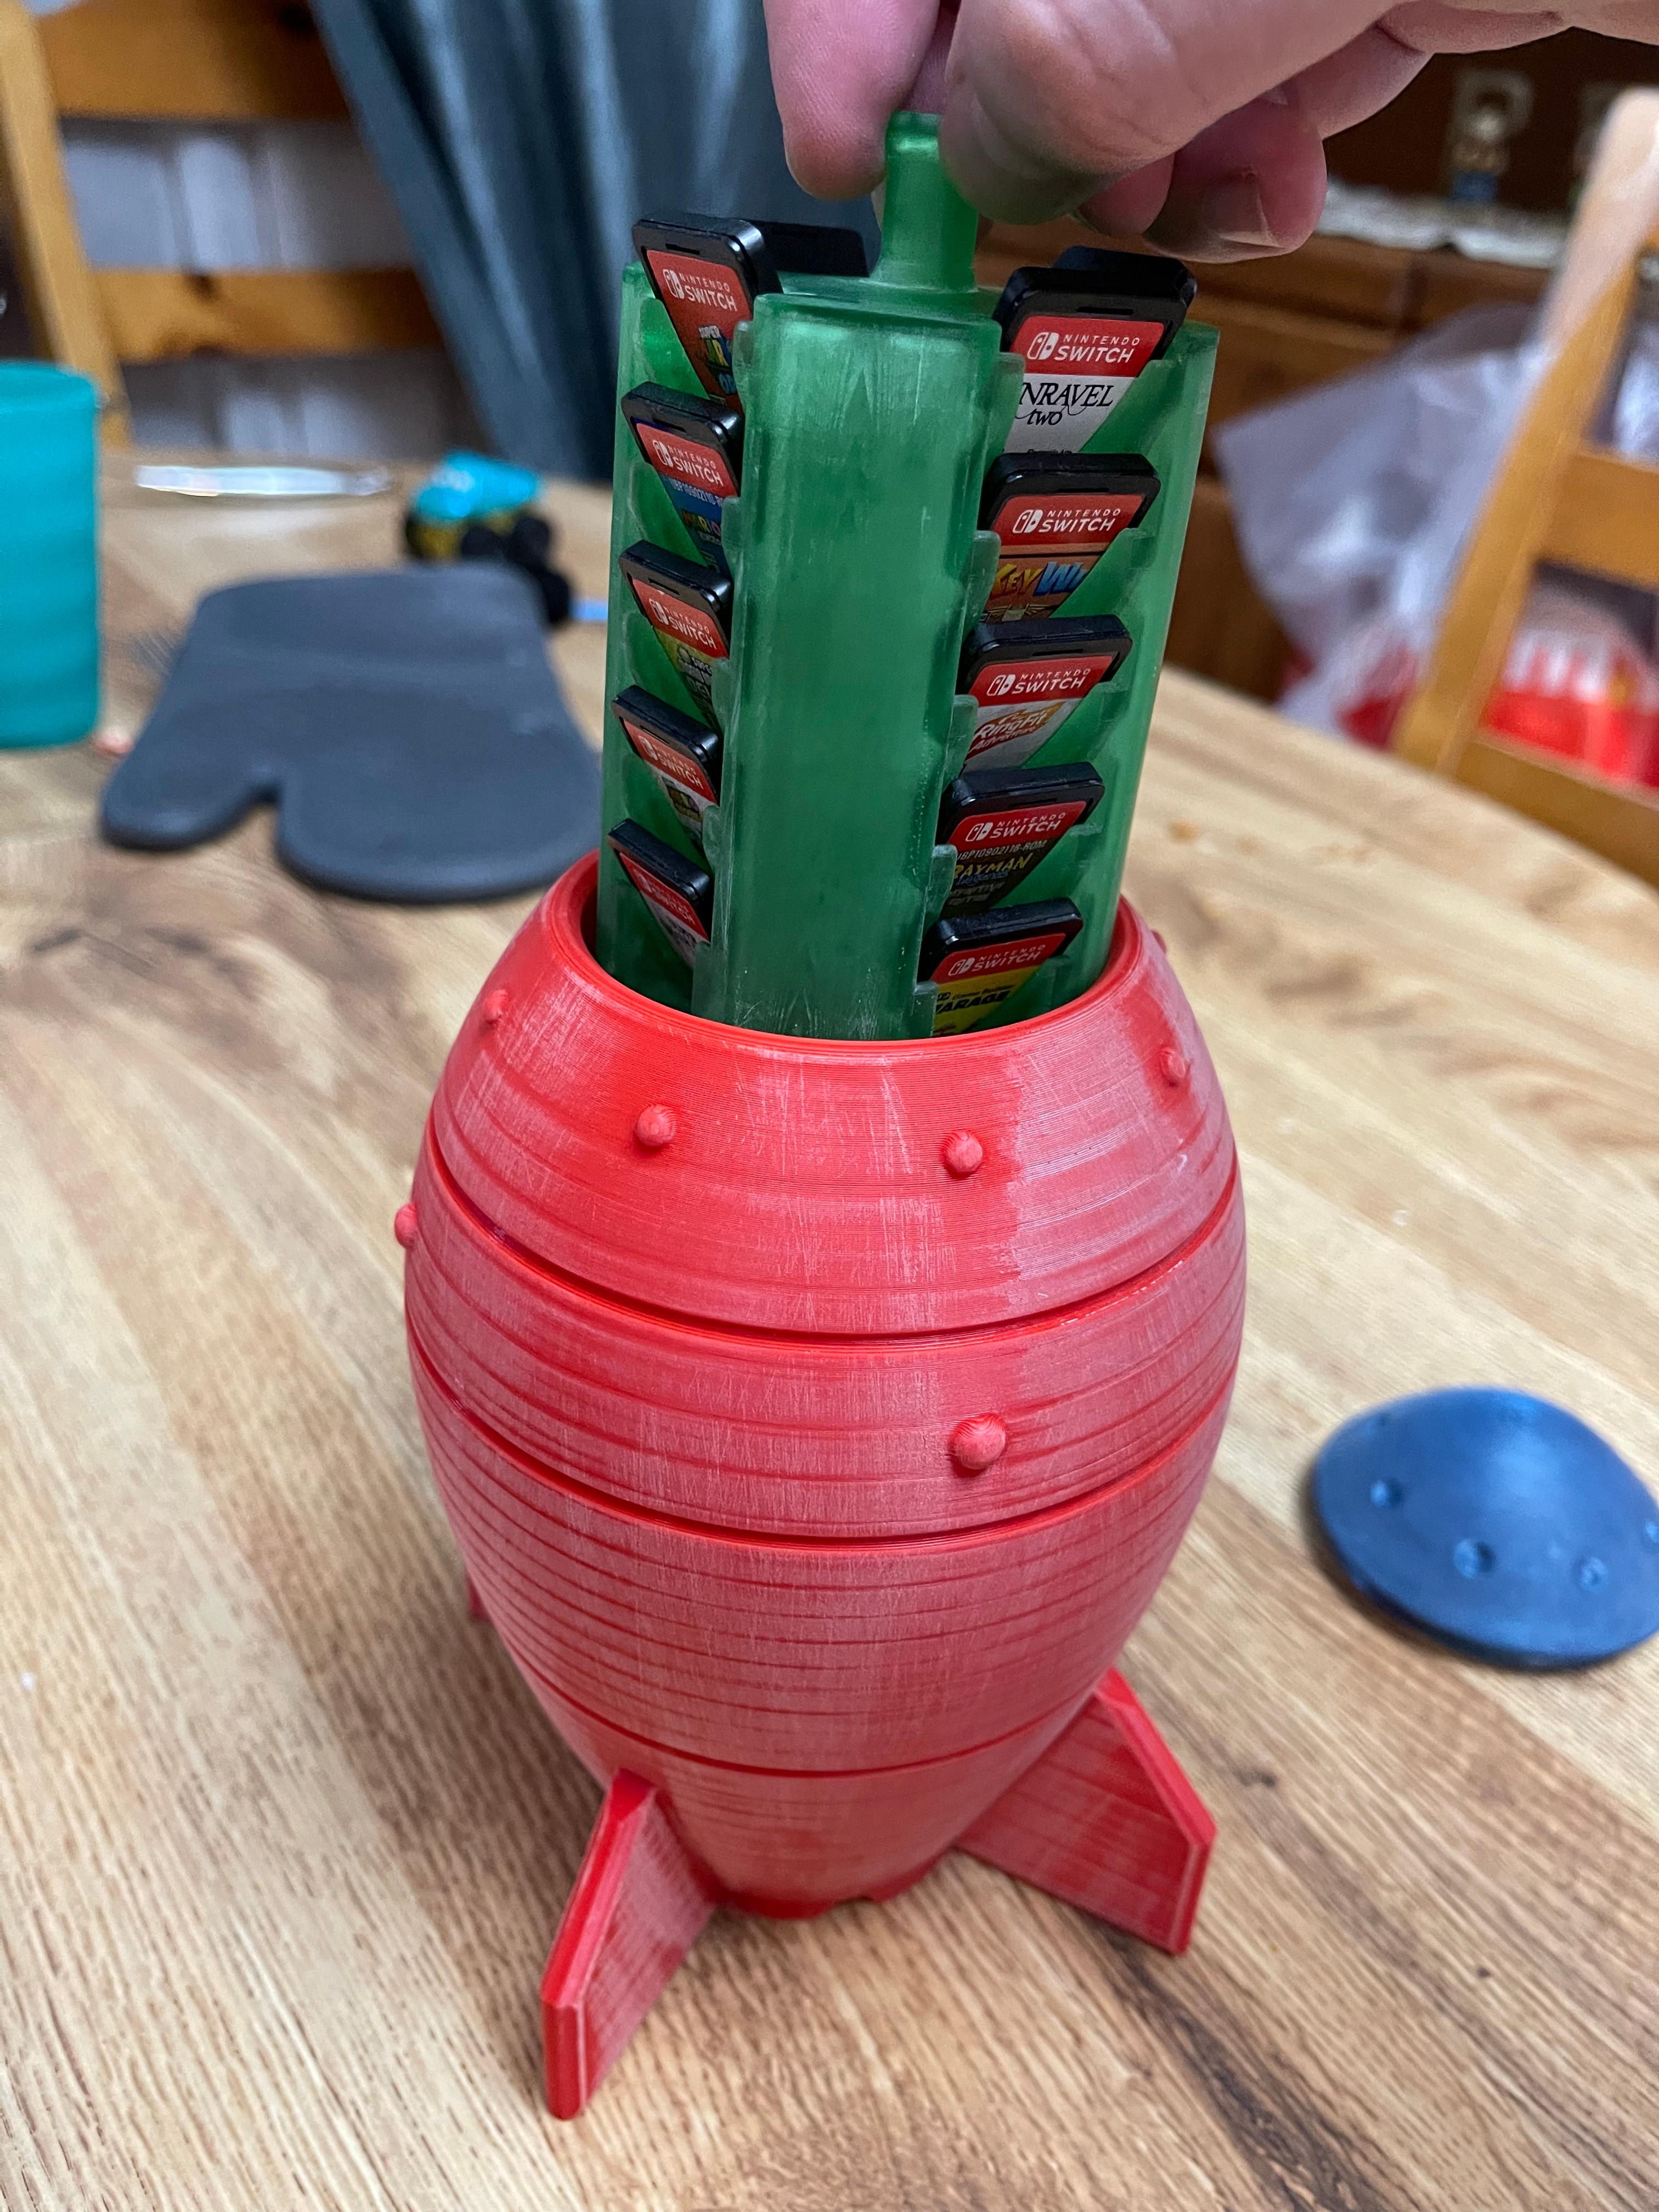 12oz Mini Nuke - Fallout 4 Can Cup! - Insert from same author printed in translucent green resin on epax printer. Will add inverted switch and led so it lights up when lifted out - 3d model